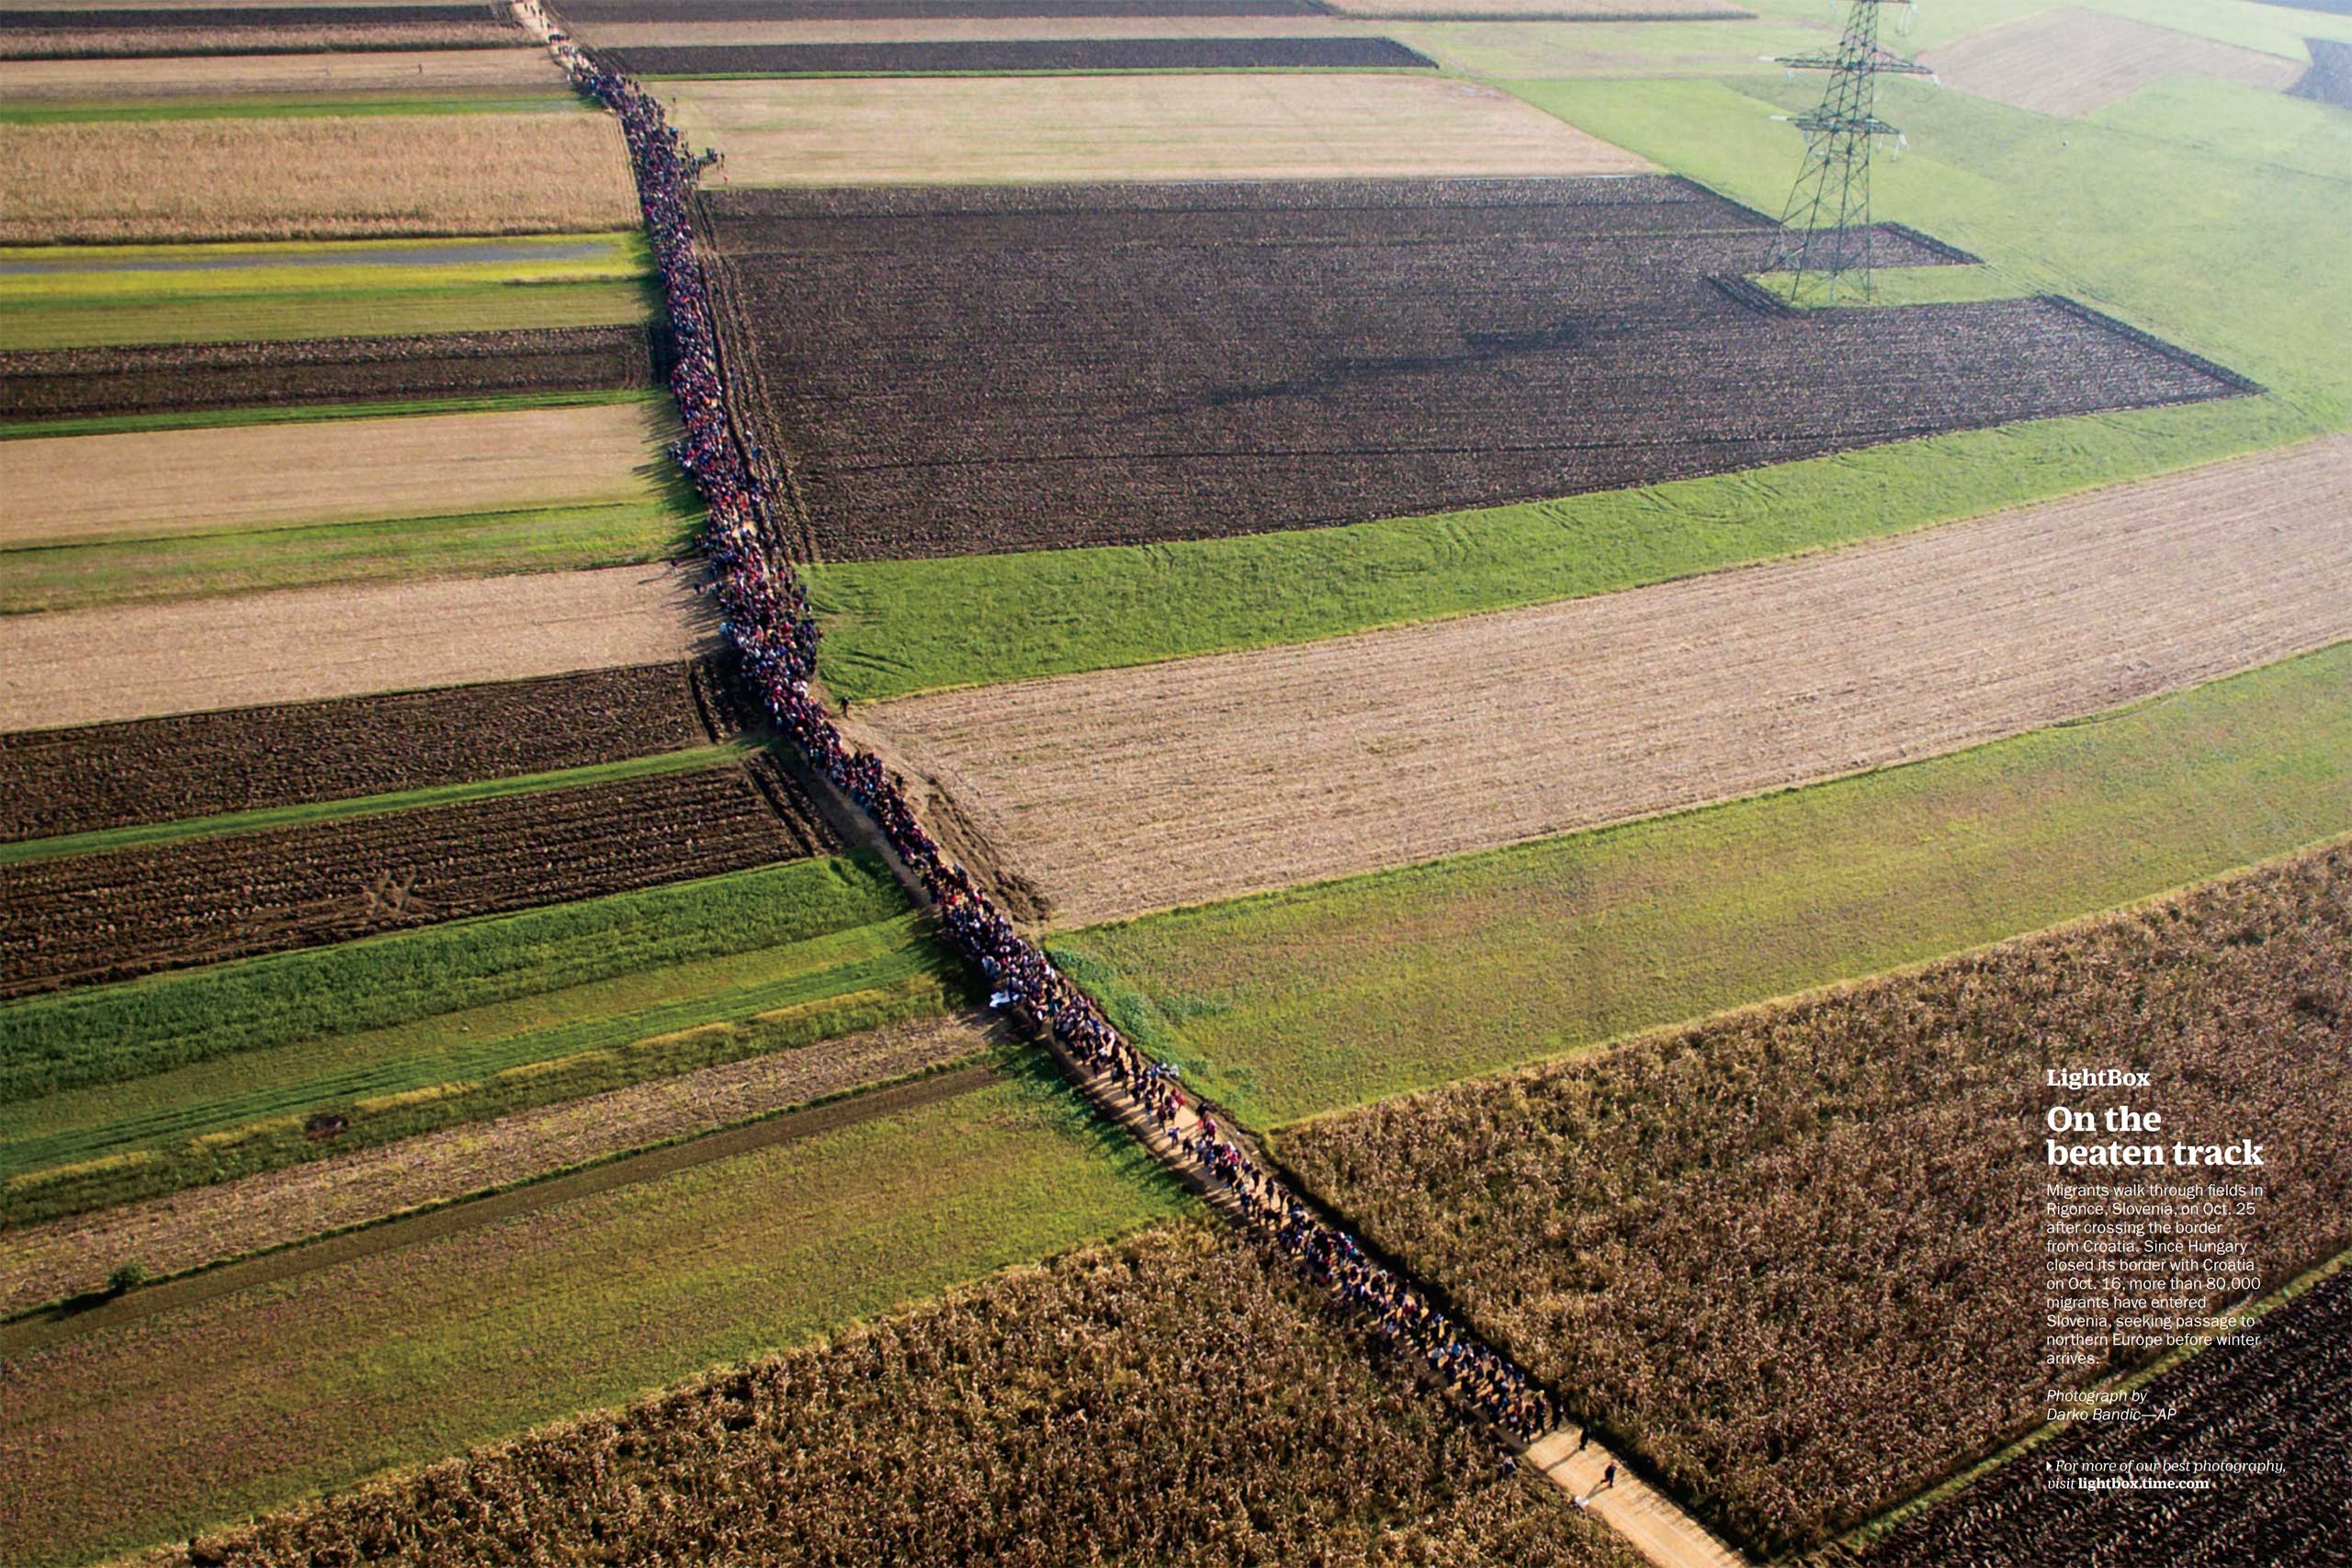 Photograph by Darko Bandic—APMigrants walk through fields in Rigonce, Slovenia, on Oct. 25 after crossing the border from Croatia. Since Hungary closed its border with Croatia on Oct. 16, more than 80,000 migrants have entered Slovenia, seeking passage to northern Europe before winter arrives. (TIME issue November 9, 2015)